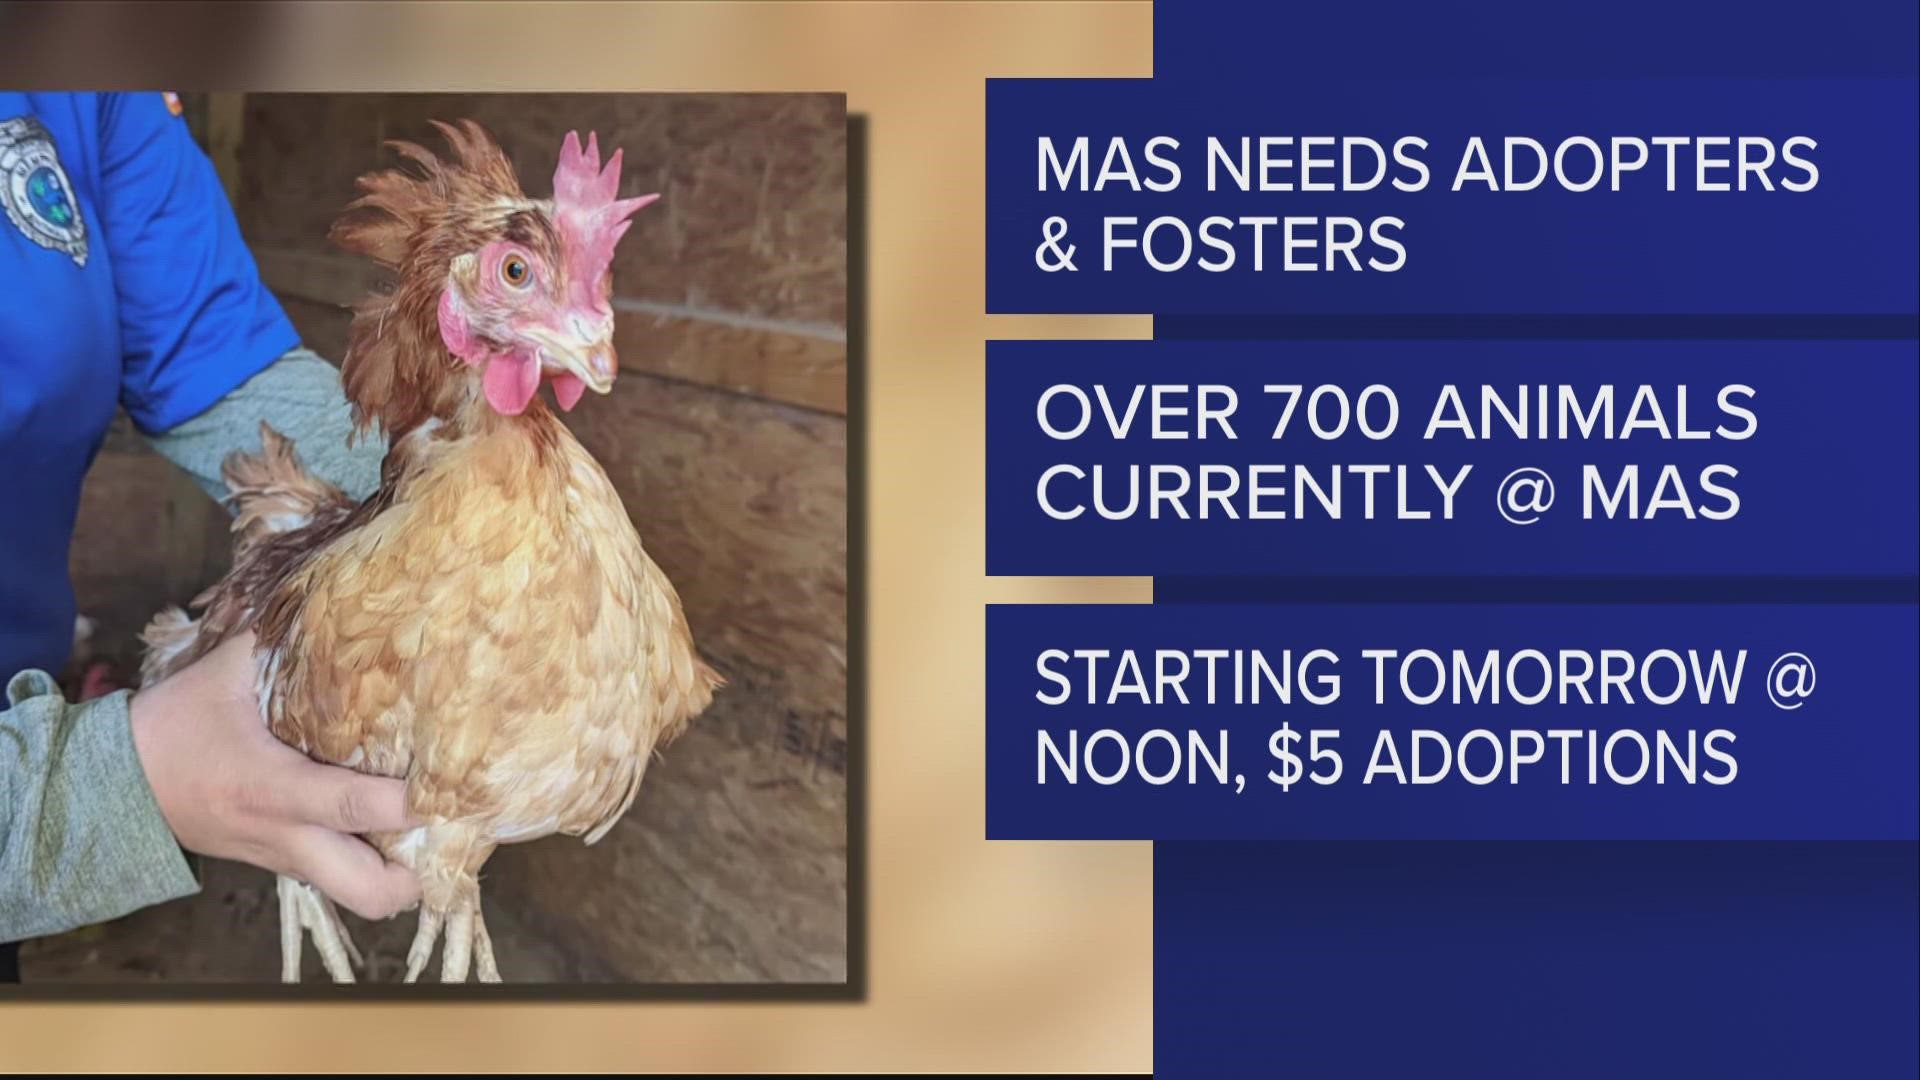 MAS is looking for adopters for more than 1,000 animals in its care.